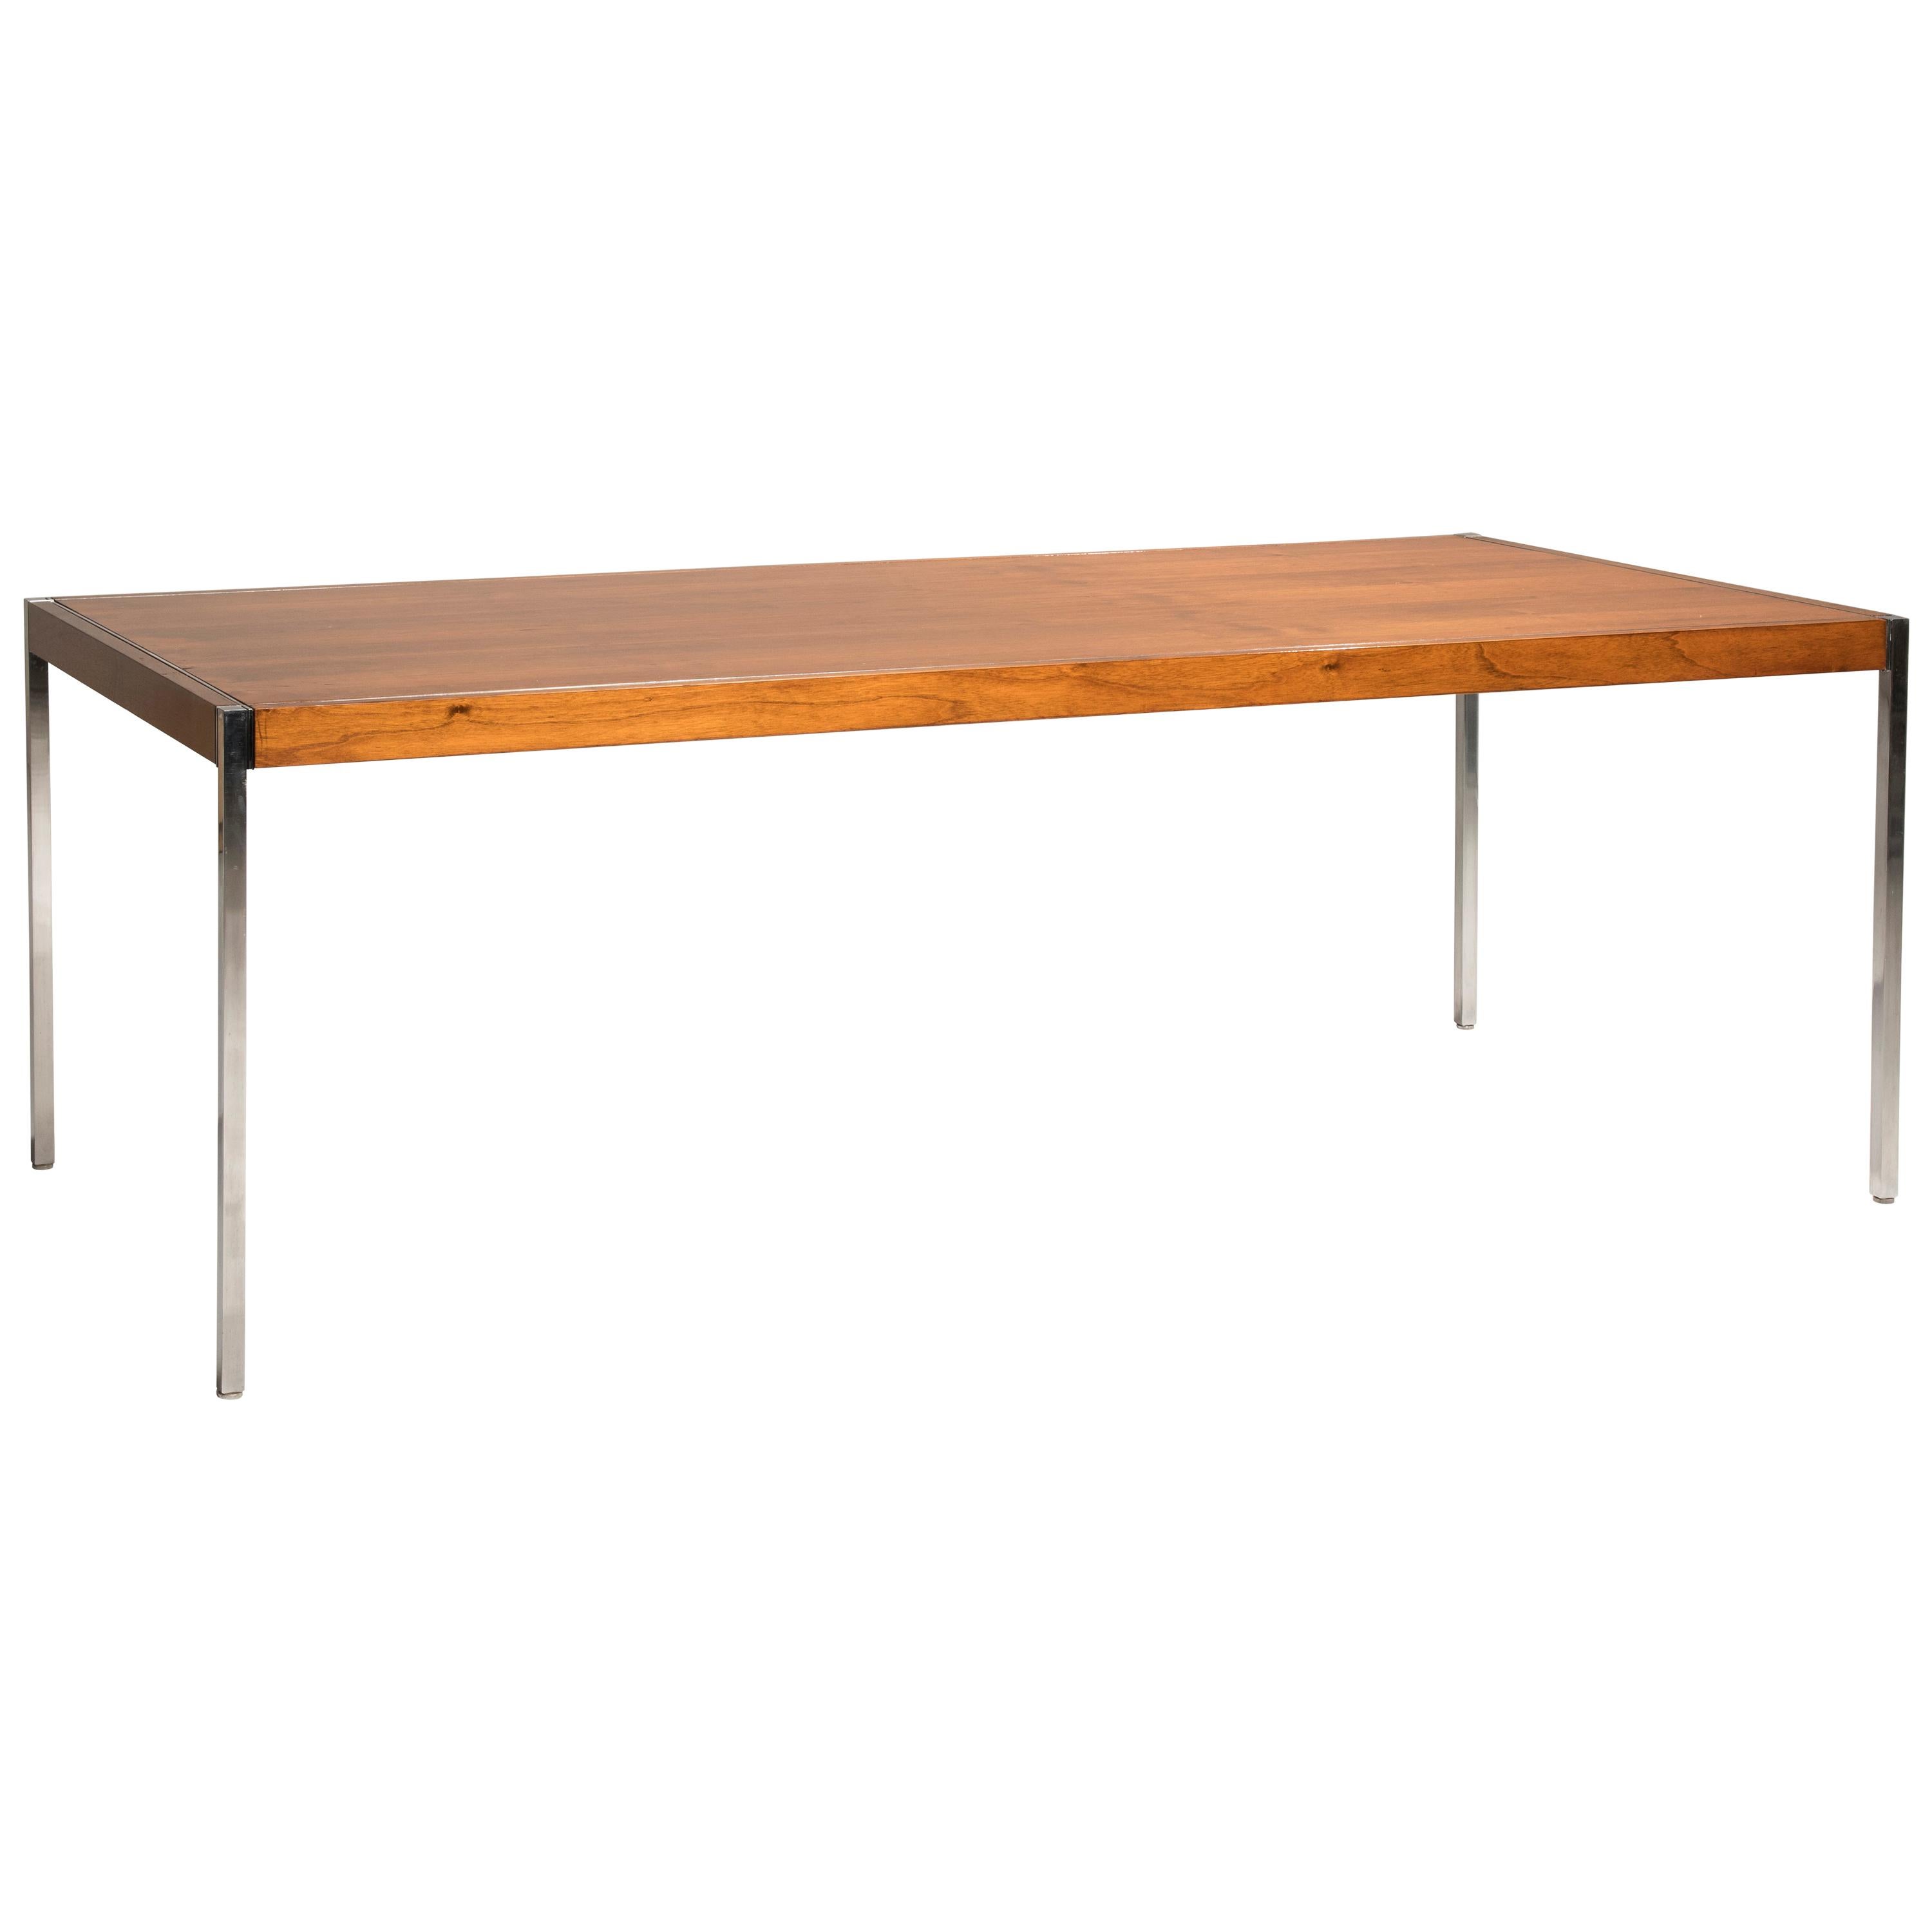 Knoll Walnut Wood Table Desks from Florence Collection 